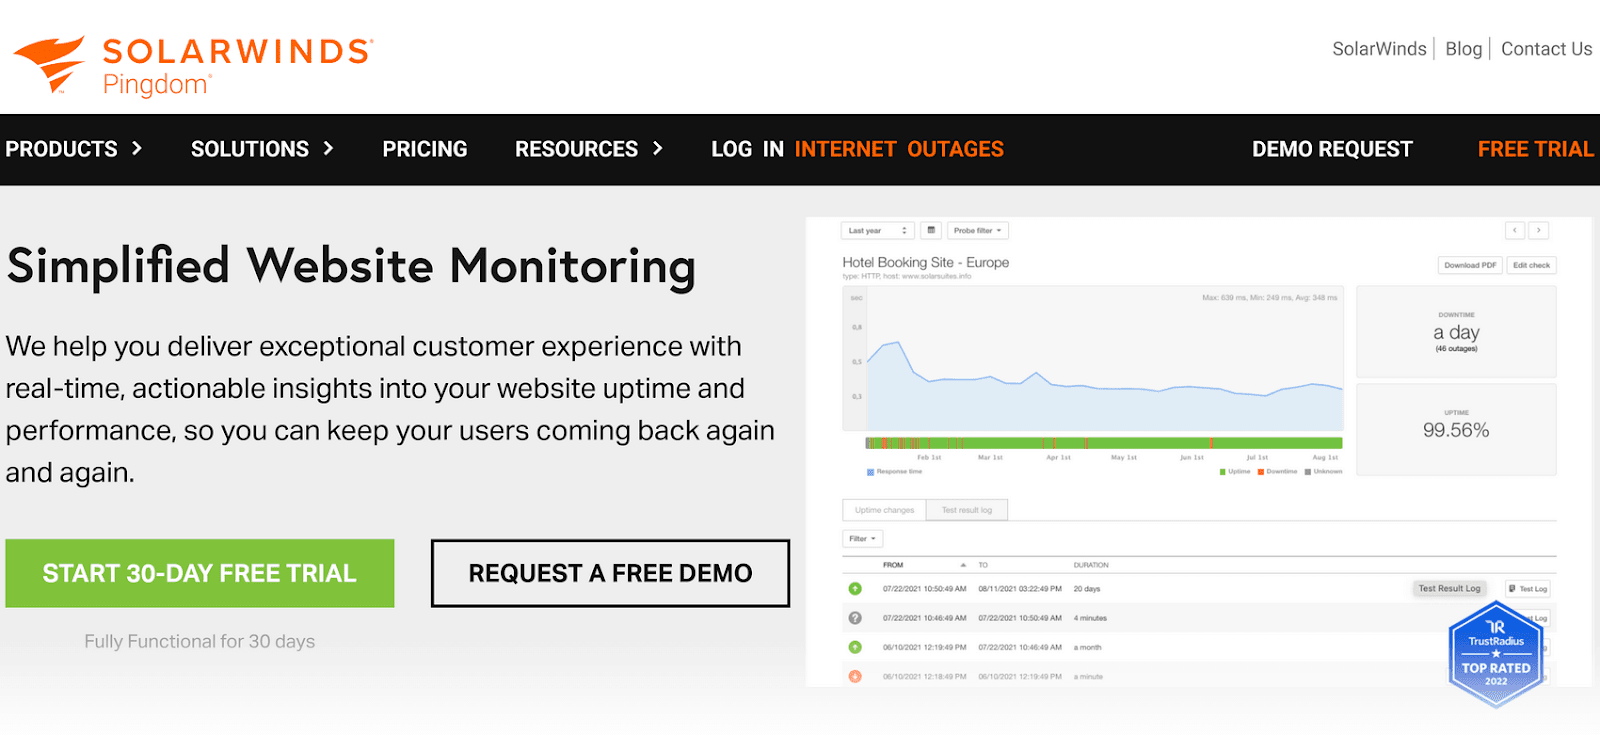 The SolarWinds Pingdom homepage advertizing  simplified website monitoring with a greenish  "Start 30-Day Free Trial" button.